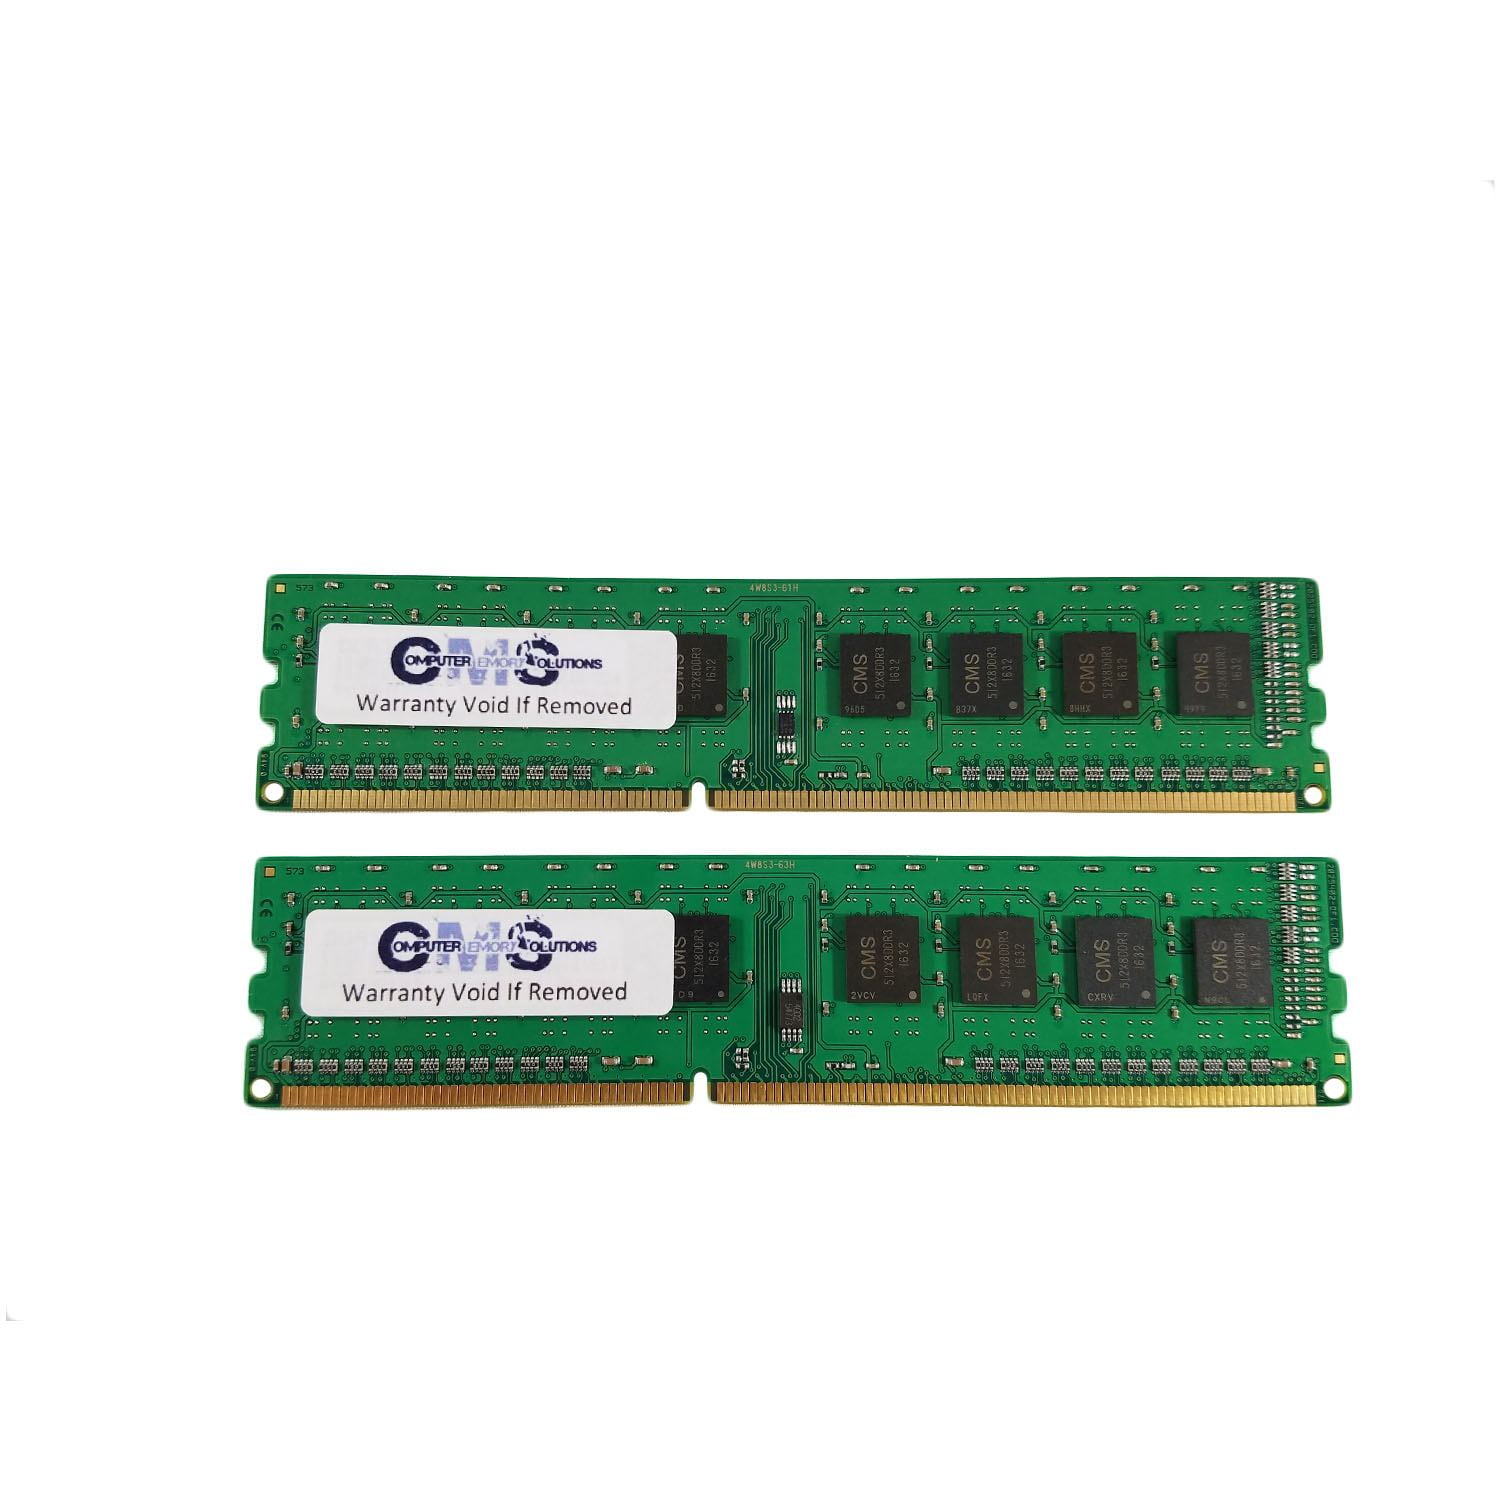 tragedie Vidunderlig solopgang CMS 16GB (2X8GB) DDR3 10600 1333MHZ NON ECC DIMM Memory Ram Upgrade  Compatible with Dell® Precision Workstation T1600 Non Ecc - A66 -  Walmart.com